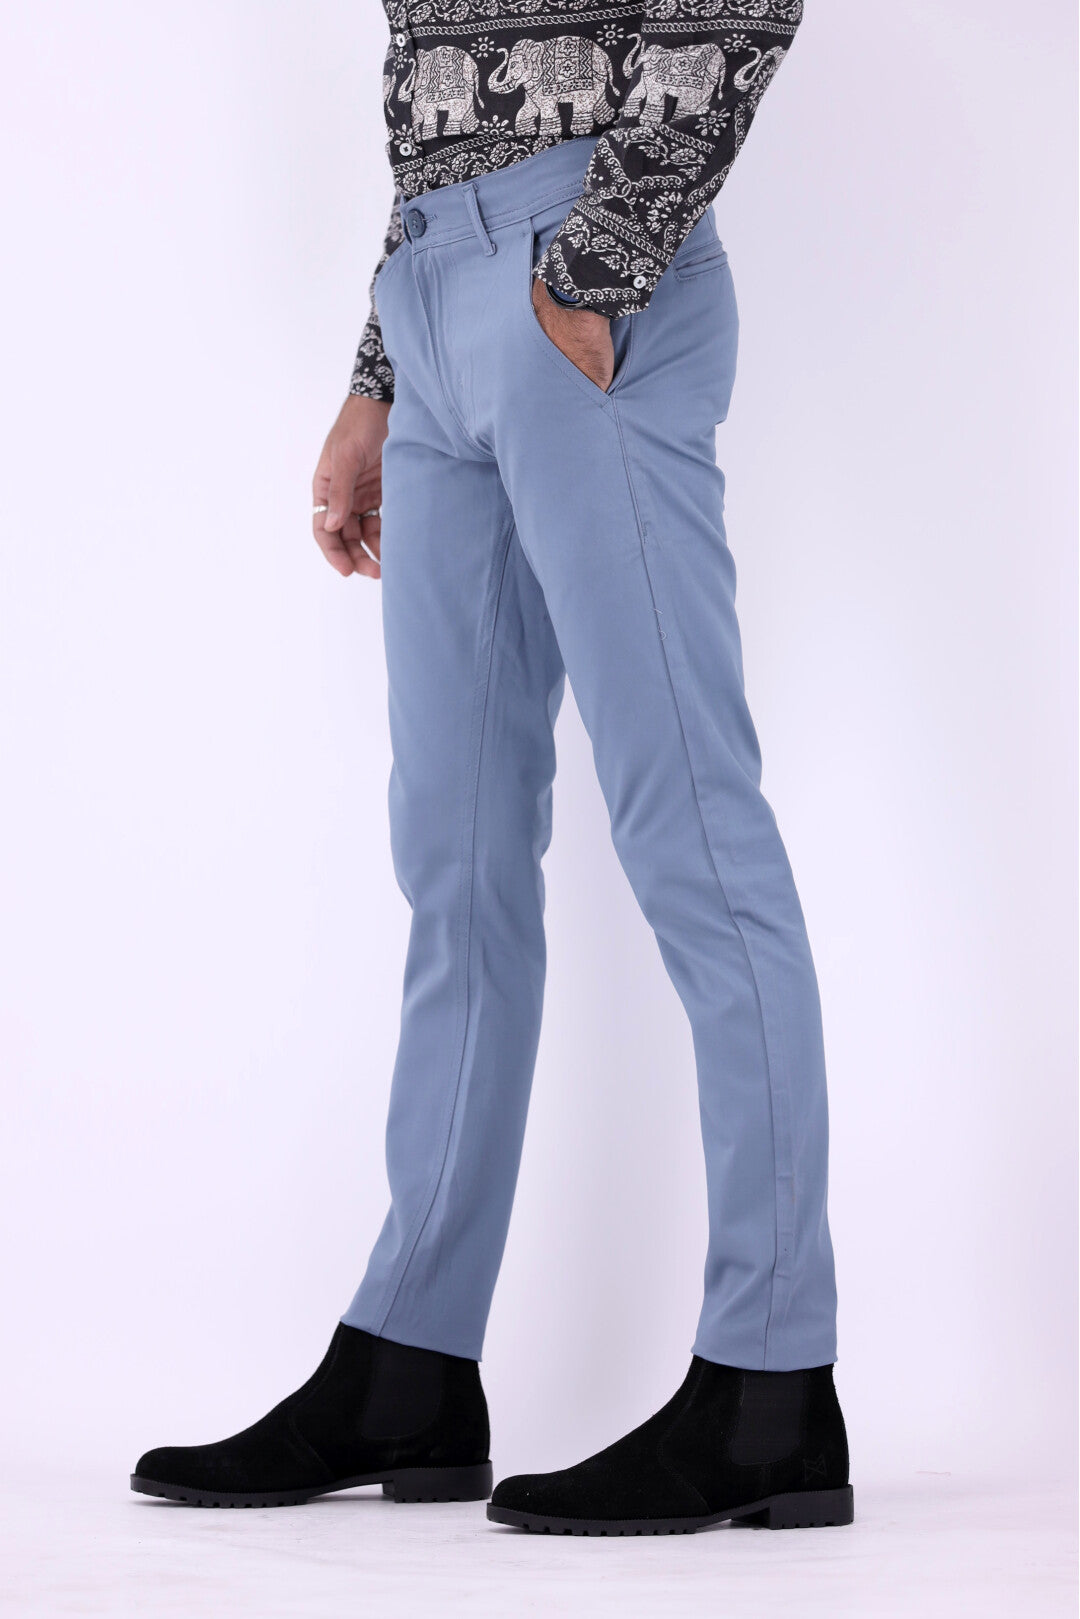 FT Cotton Chinos Pant - Light Blue